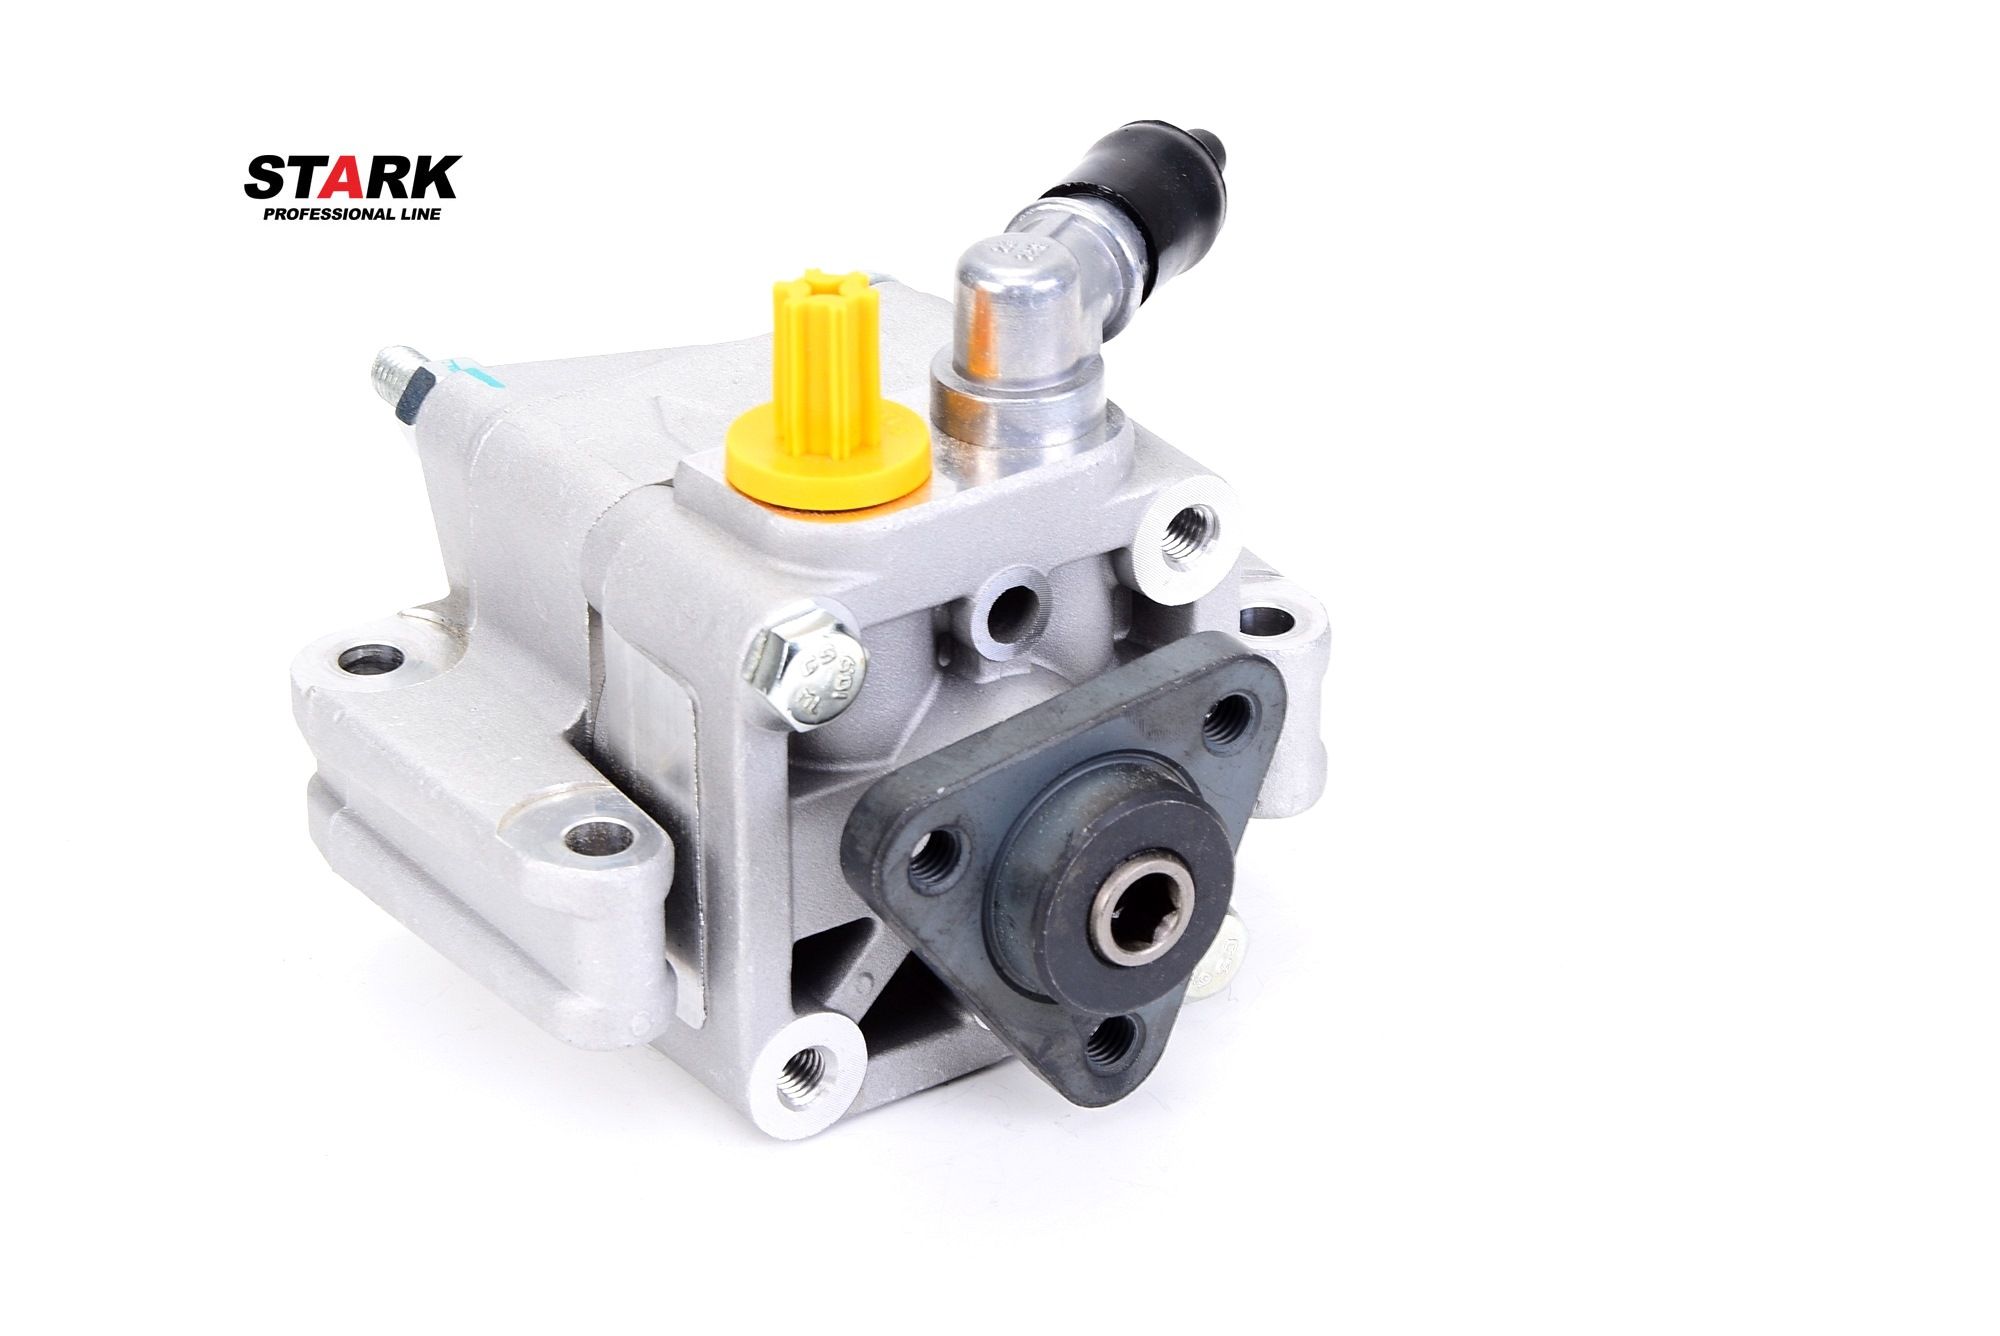 STARK SKHP-0540029 Power steering pump Hydraulic, M16x1.5, 80 l/h, triangular, for left-hand/right-hand drive vehicles